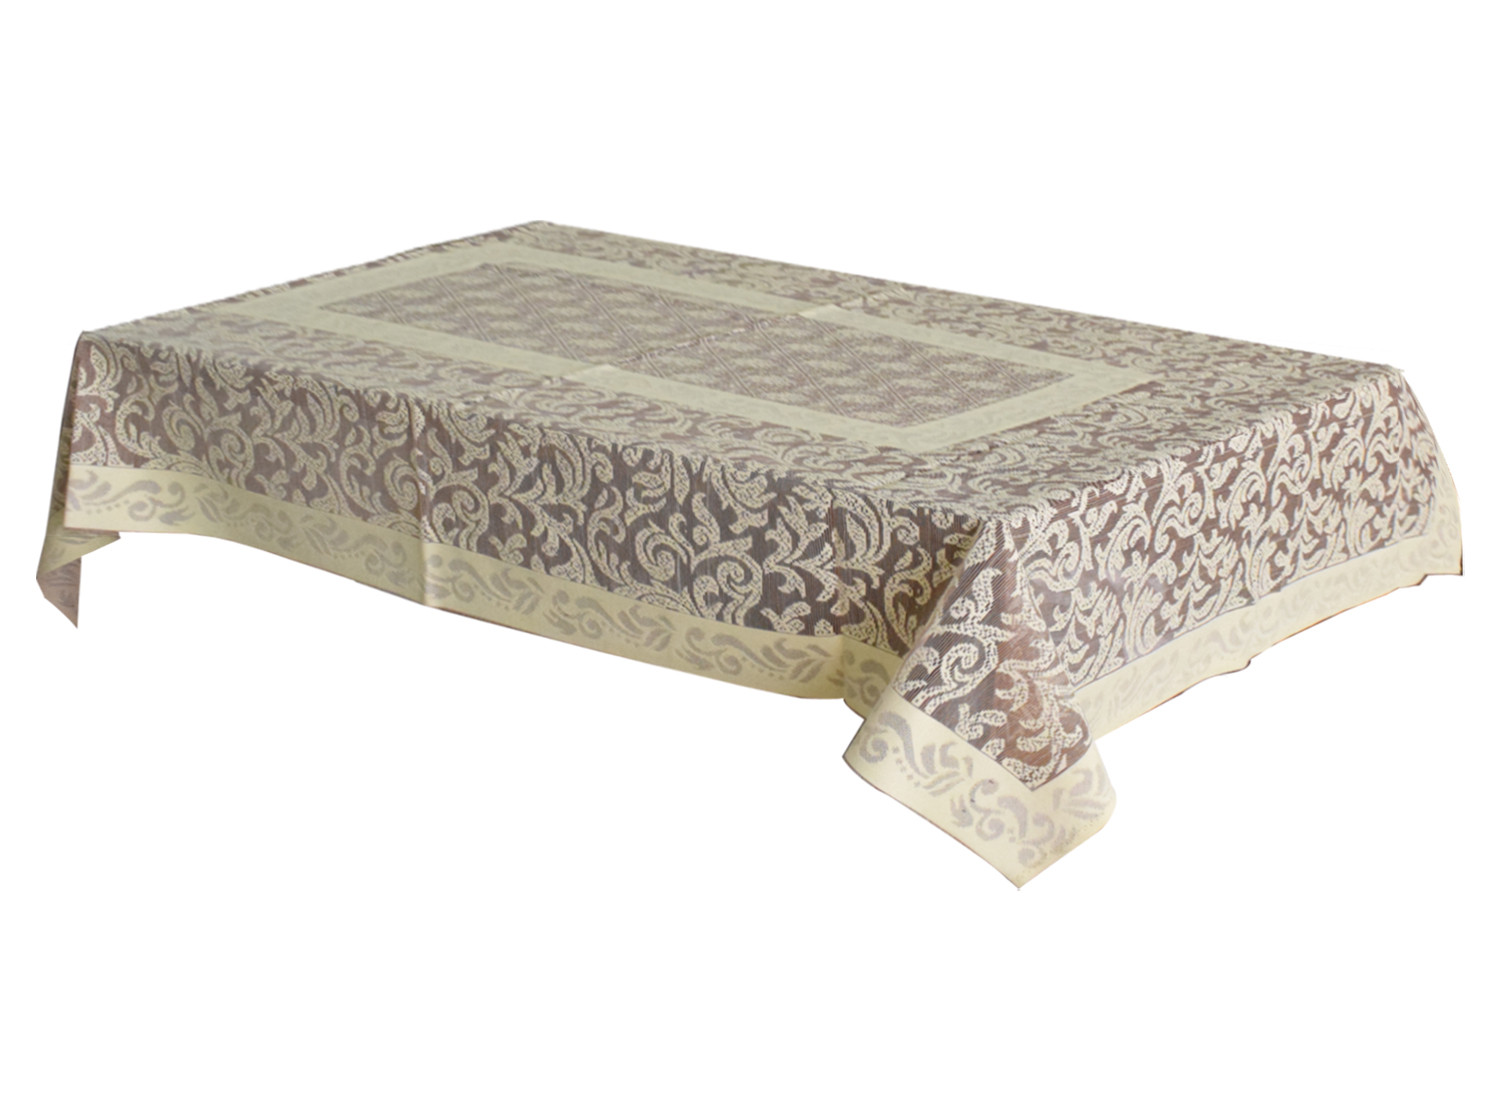 Kuber Industries Leaf Design Cotton 4 Seater Center Table Cover 60